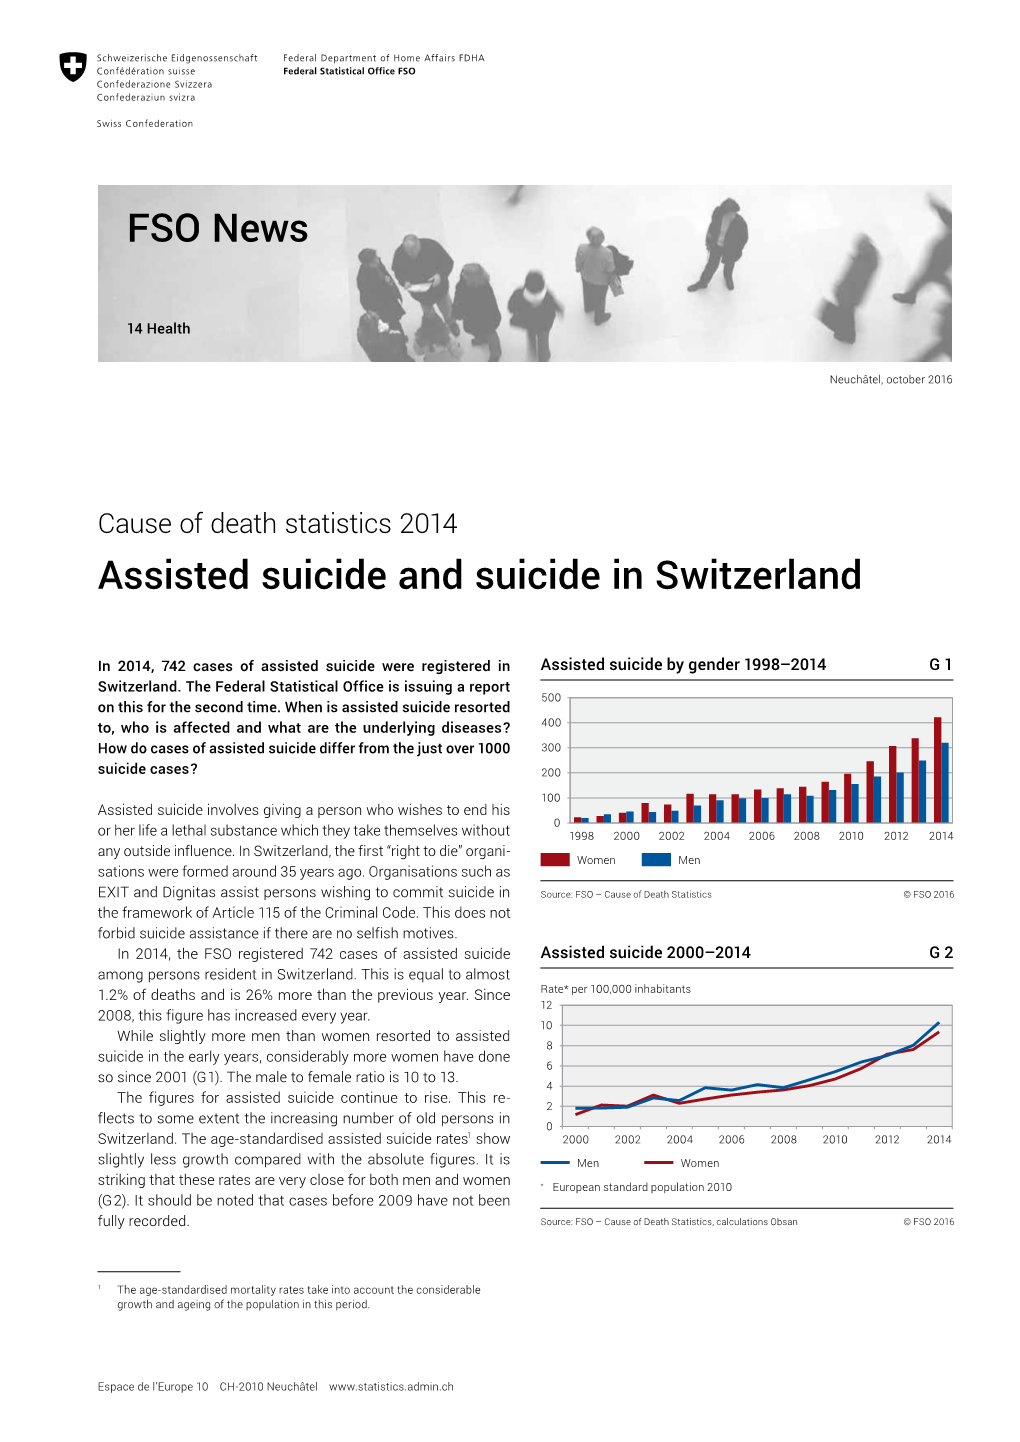 Assisted Suicide and Suicide in Switzerland FSO News